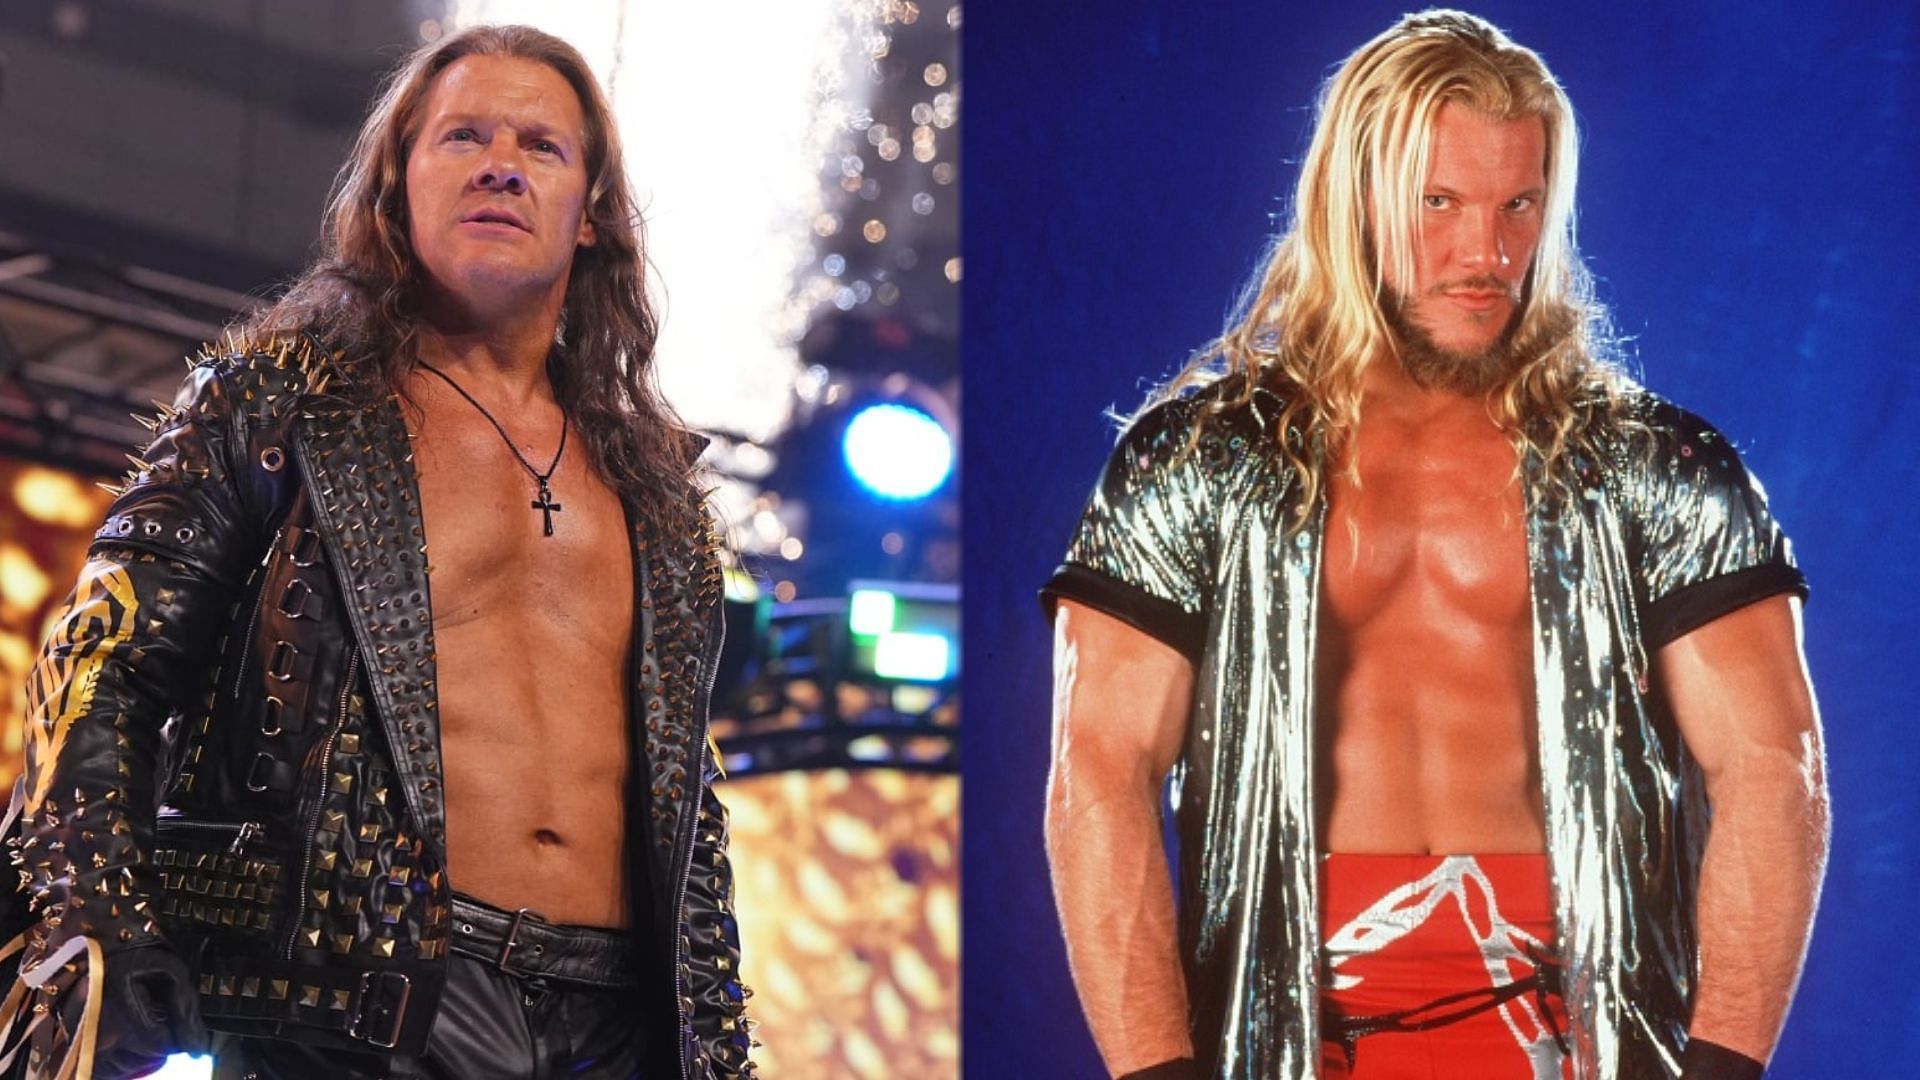 Chris Jericho has been in the wrestling industry for over 30 years.